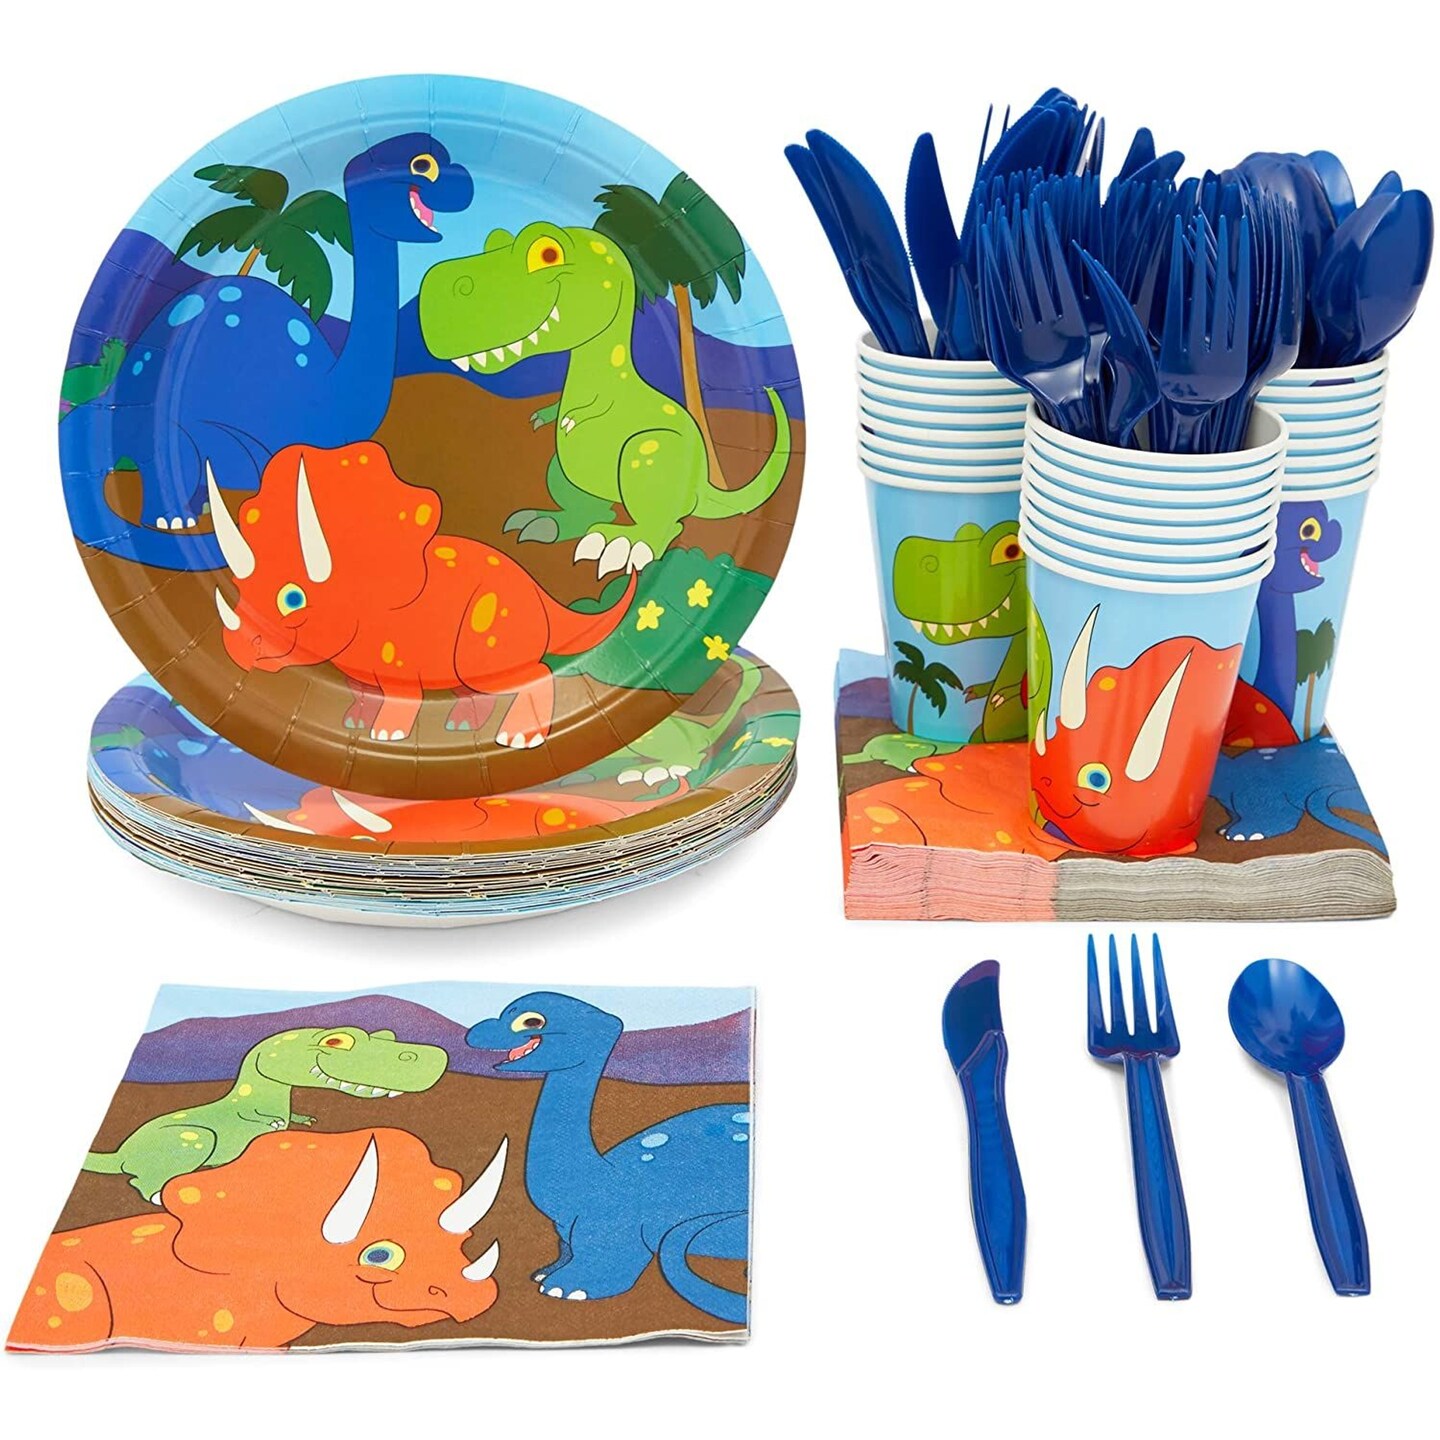 144 Pieces Dinosaur Birthday Party Supplies with Plates, Knives, Spoons,  Forks, Cups, and Napkins (Serves 24)